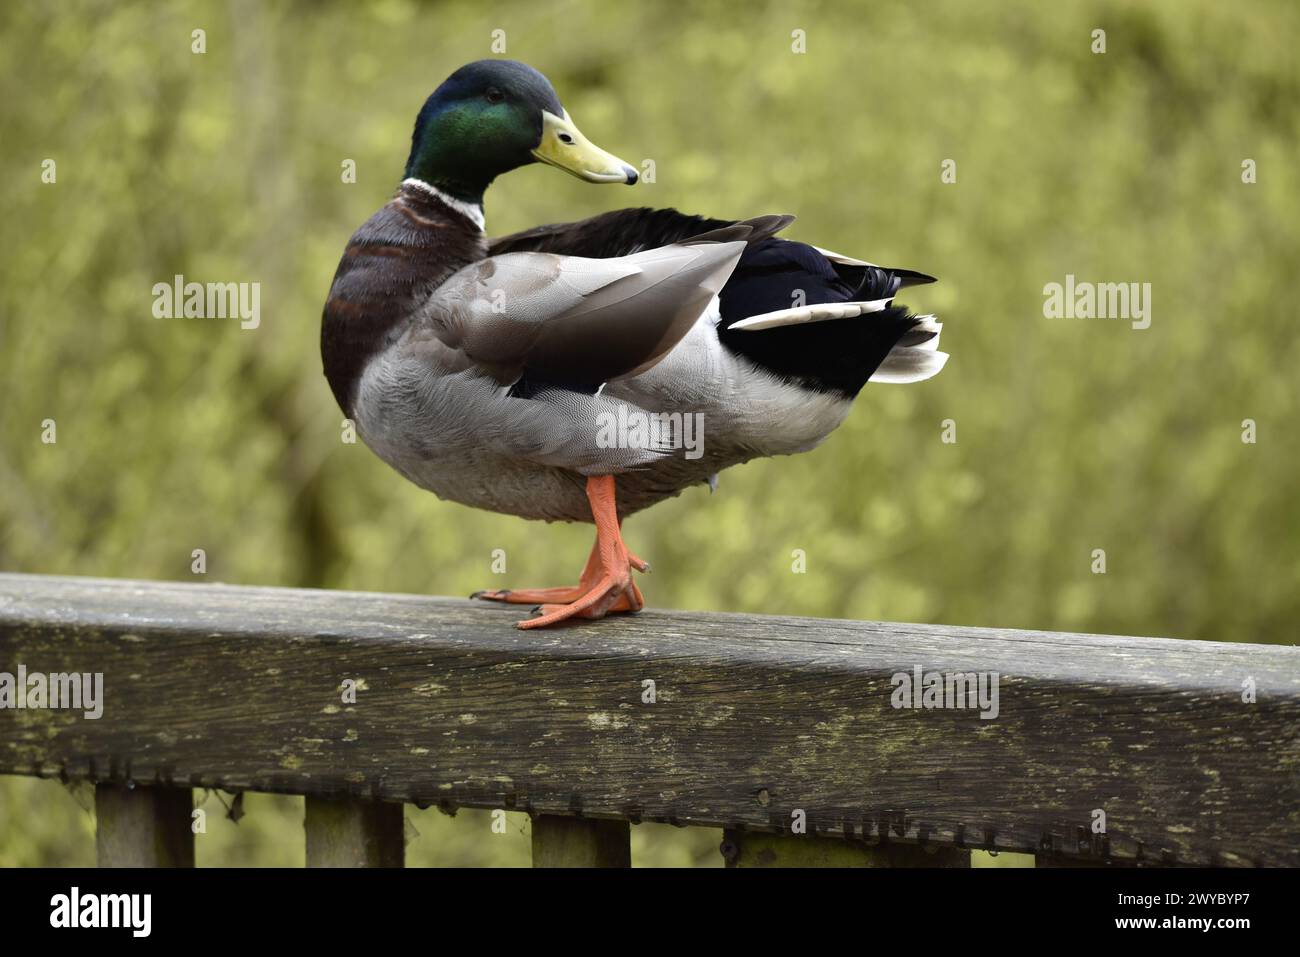 Drake Mallard Duck (Anas platyrhynchos) in Breeding Plumage, Standing in Left-Profile at Eye Level and Head Turned to Right on Top of Wooden Railings Stock Photo